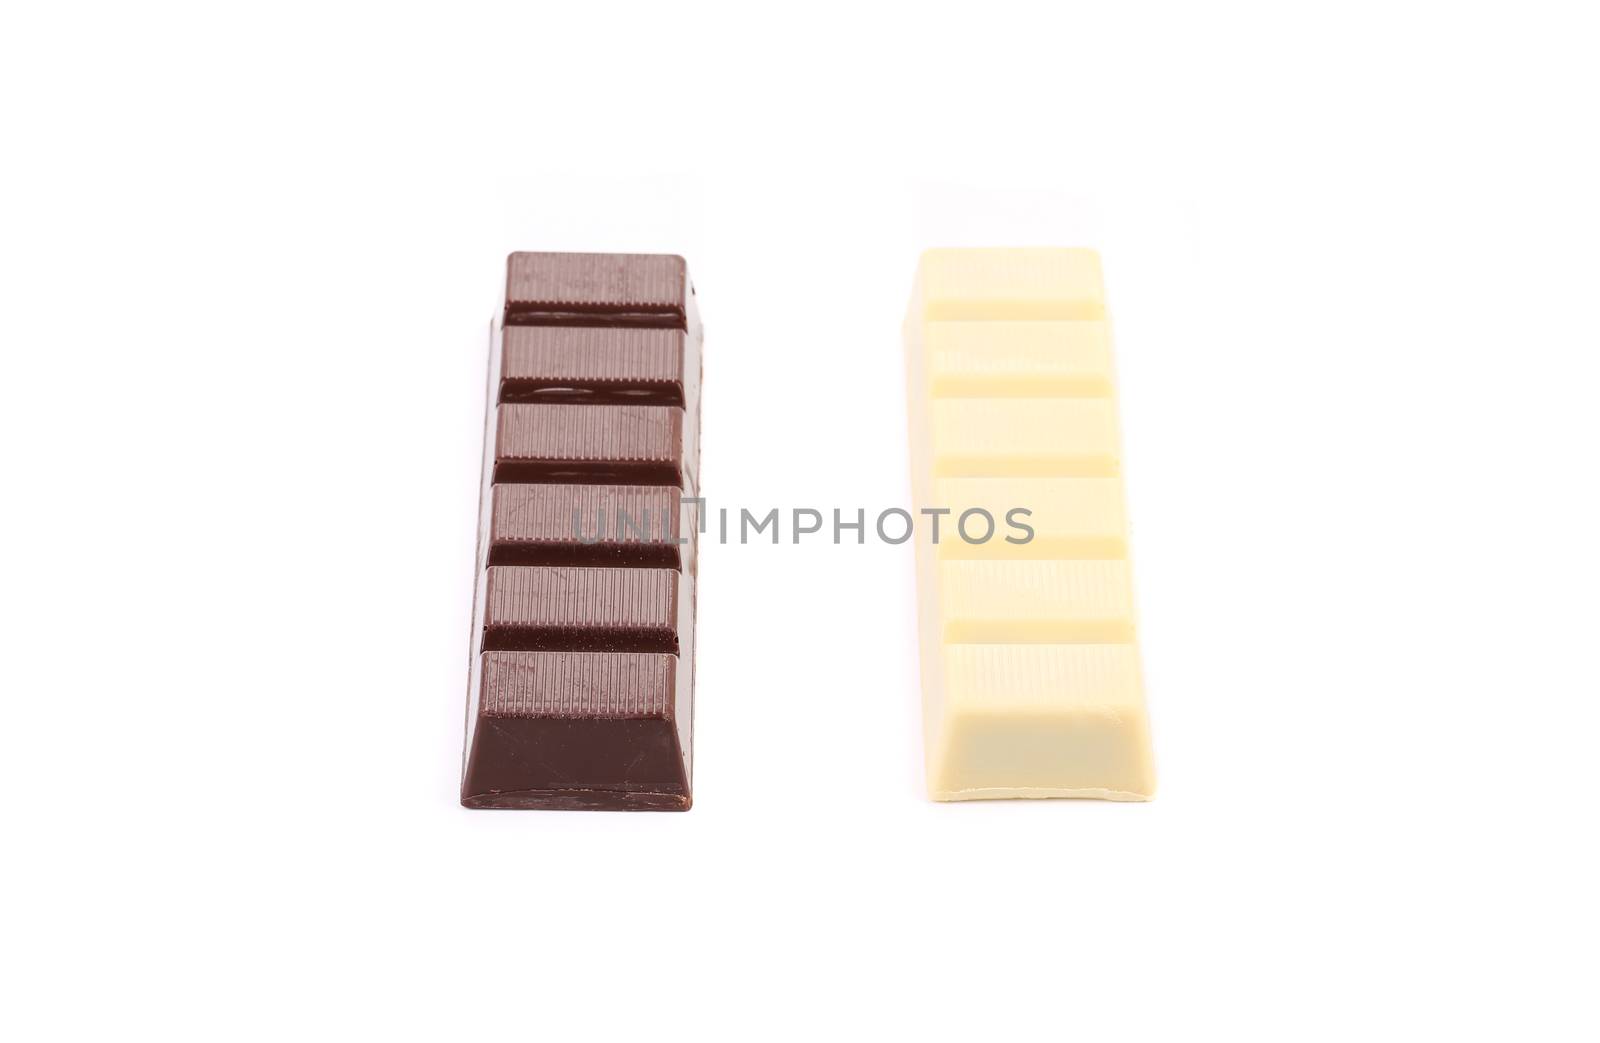 Delicious chocolate bars. Isolated on a white background.